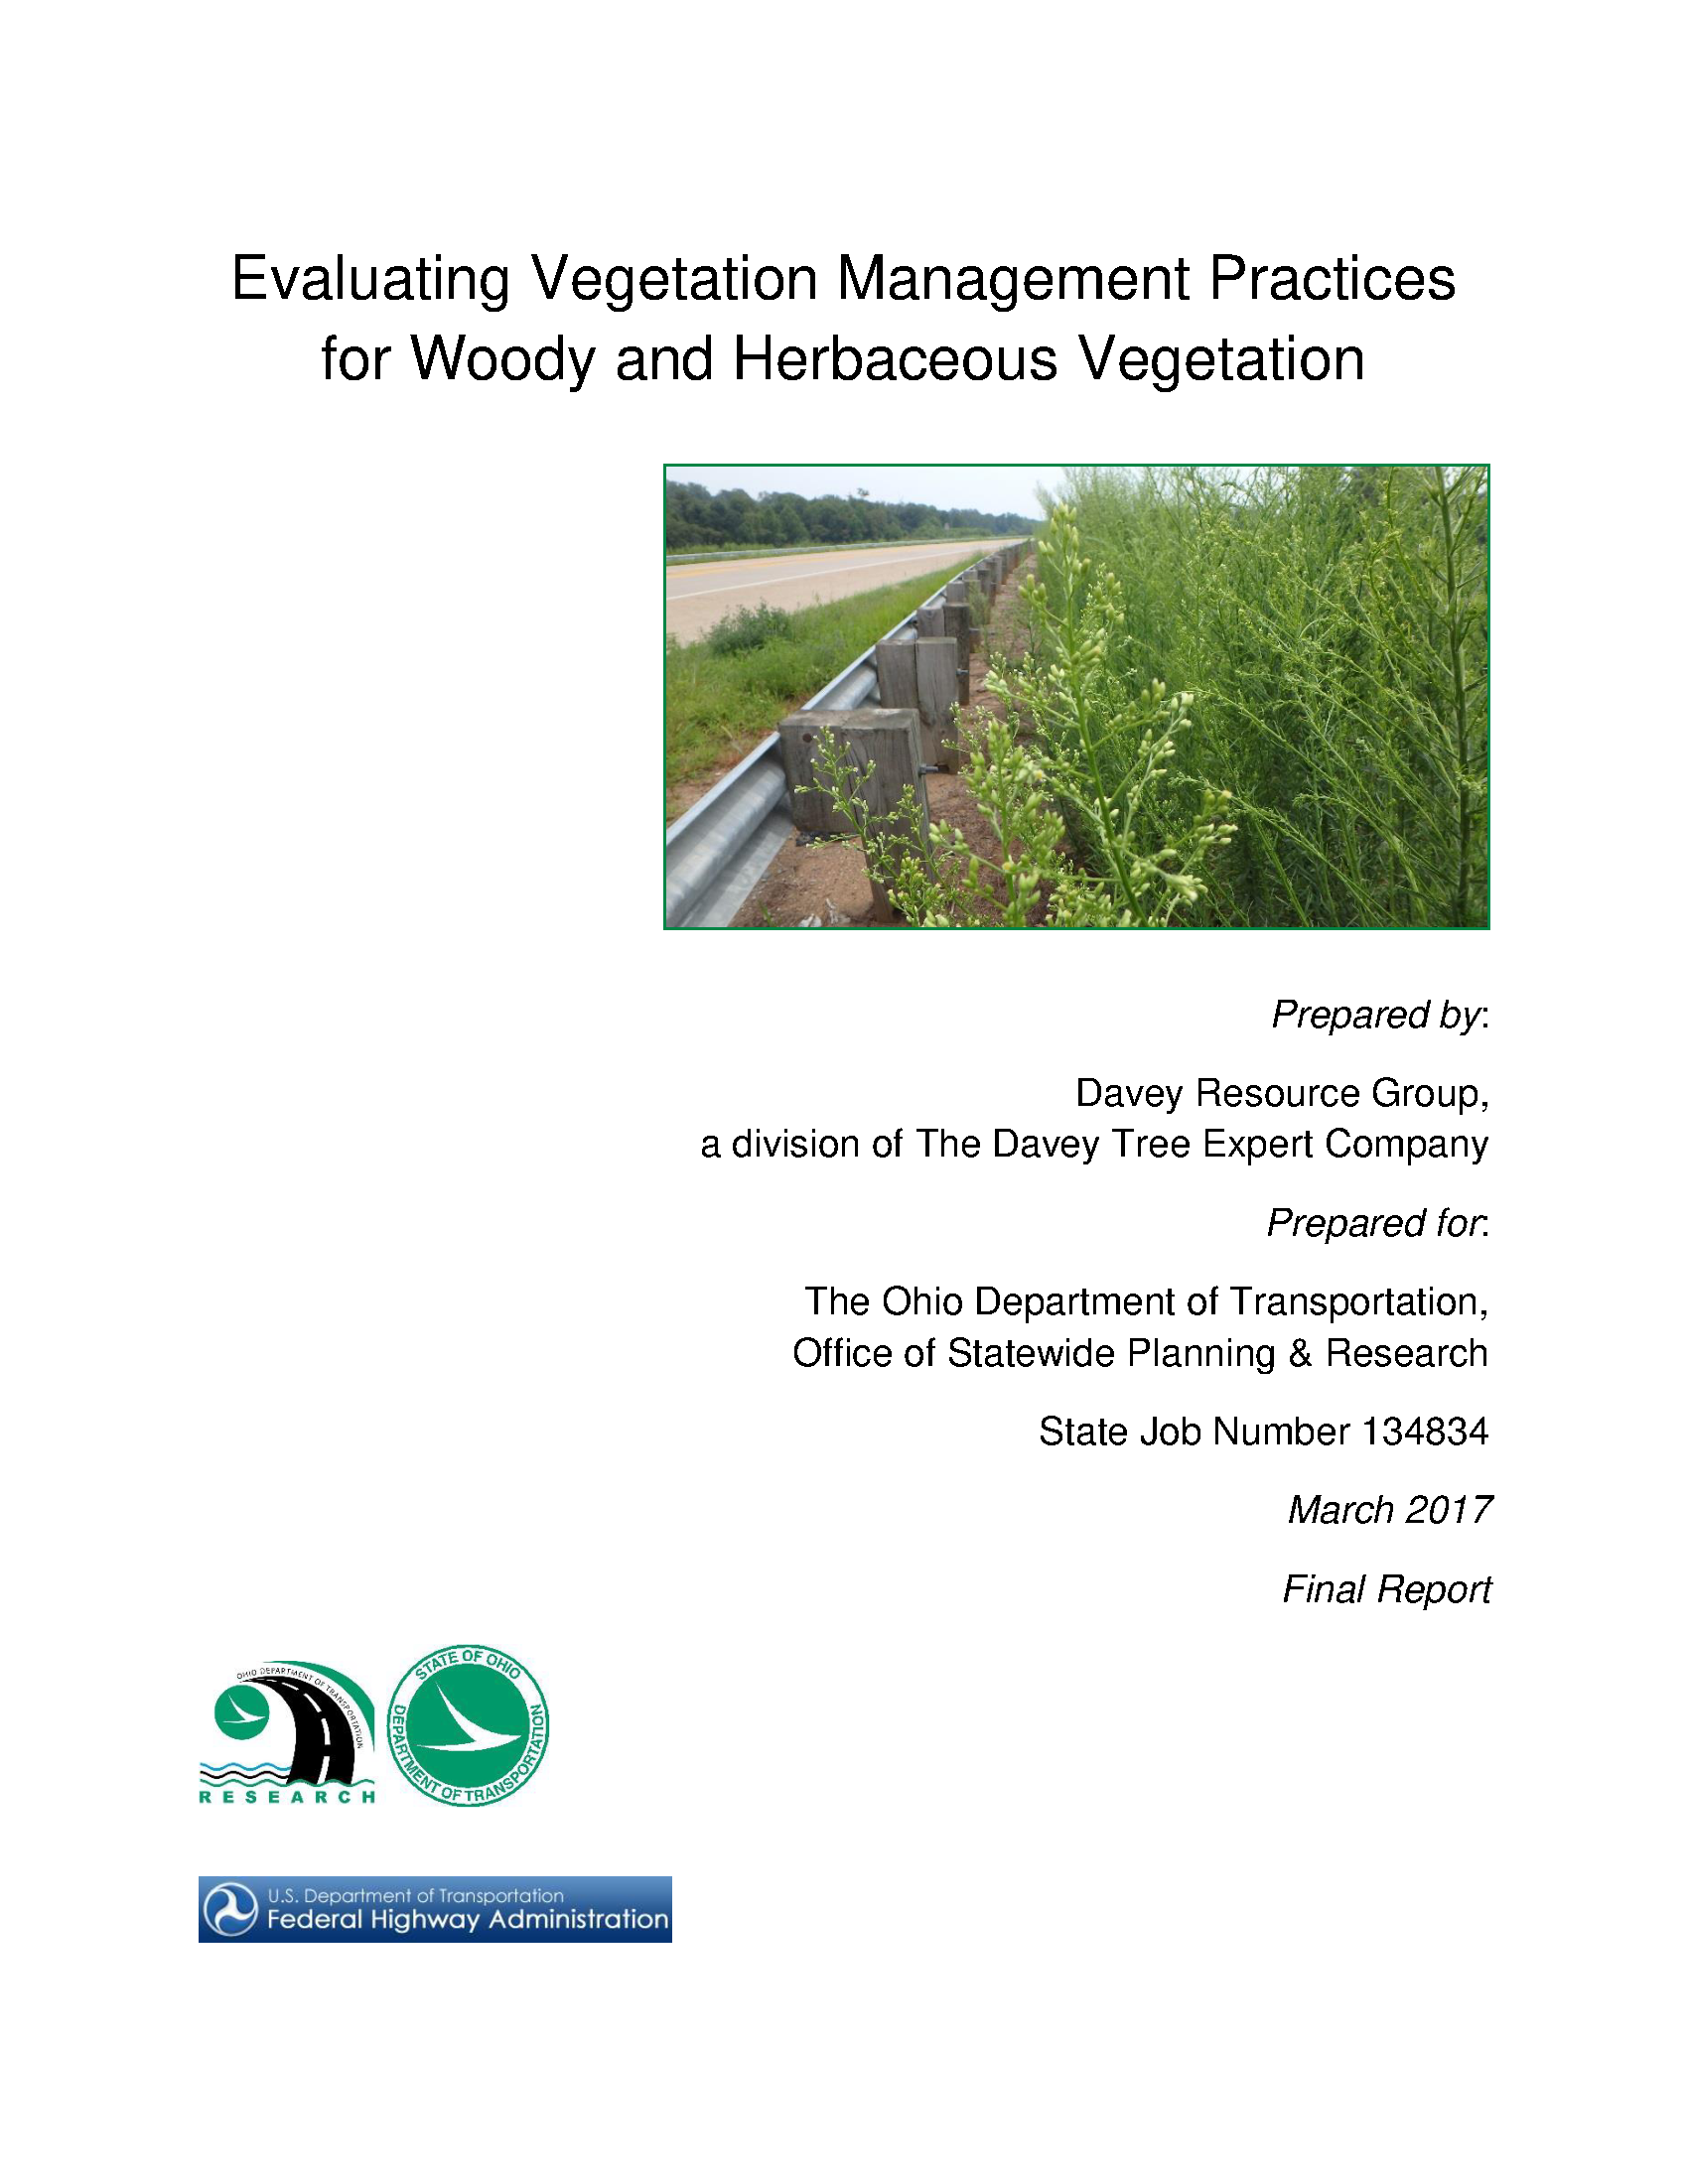 Evaluating vegetation management practices for woody and herbaceous vegetation Preview